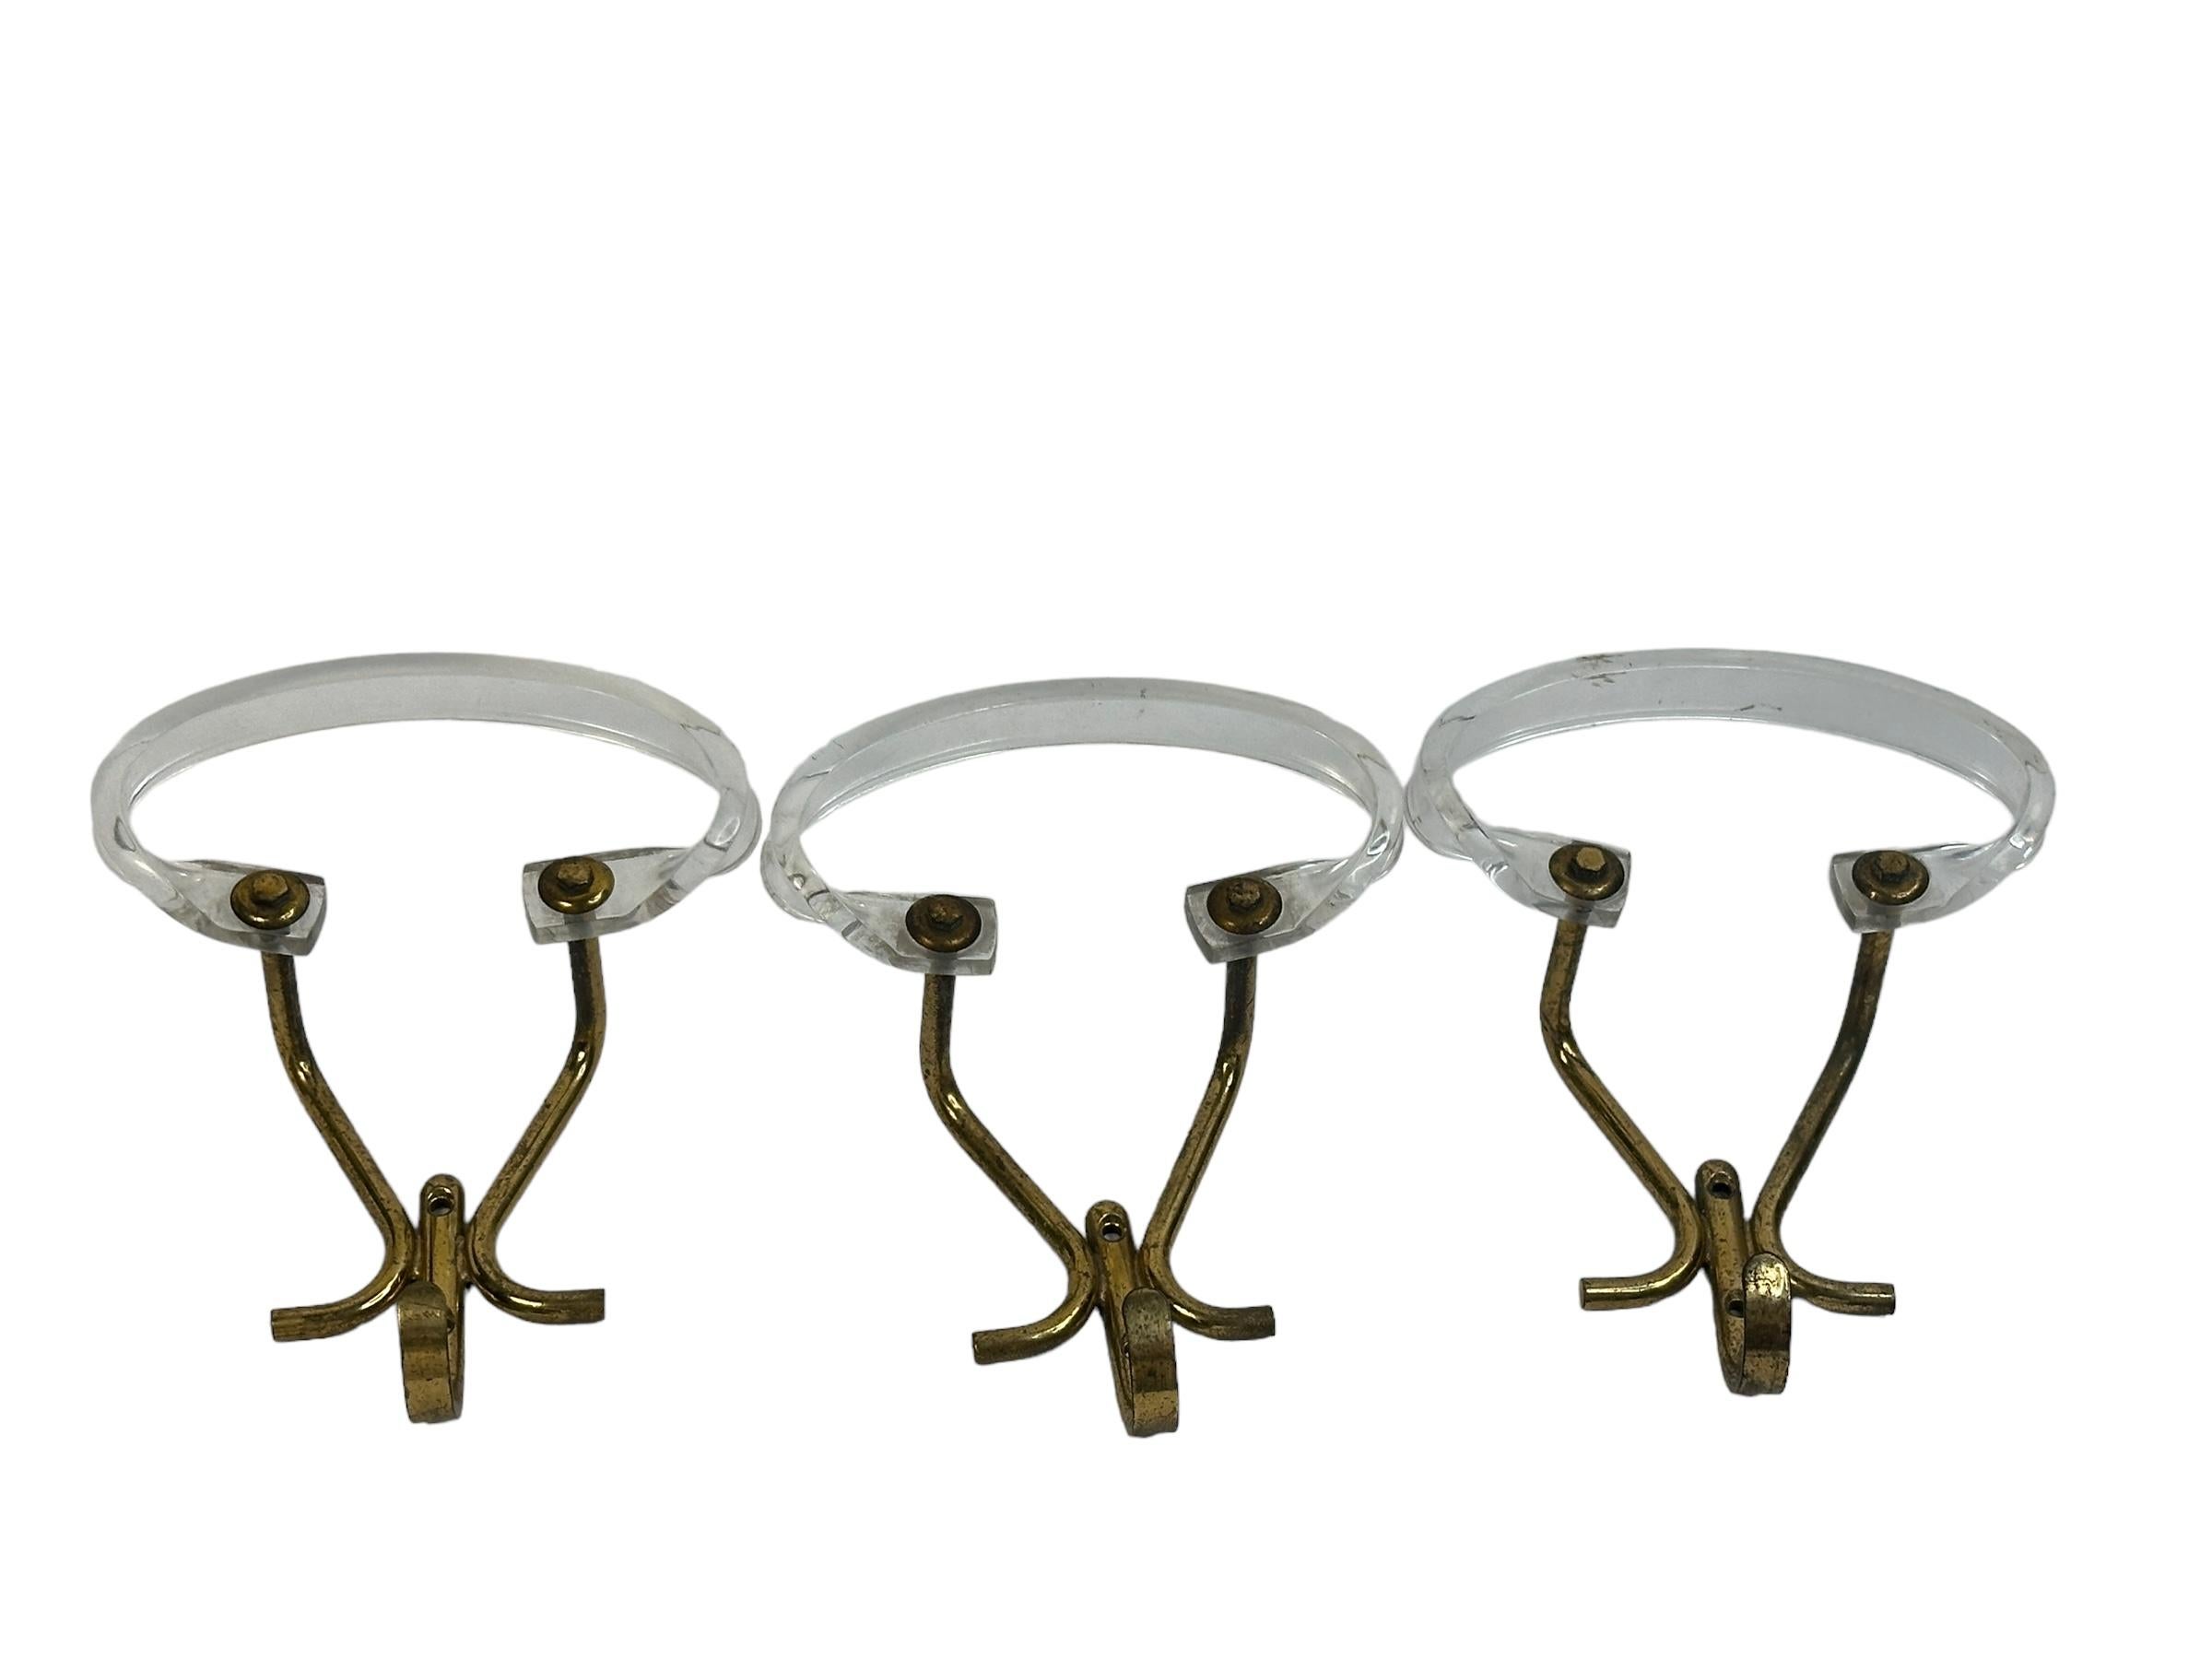 Italian Set of Three Wall Coat Hooks, Lucite and Brass, Mid-Century Modern, 1960s For Sale